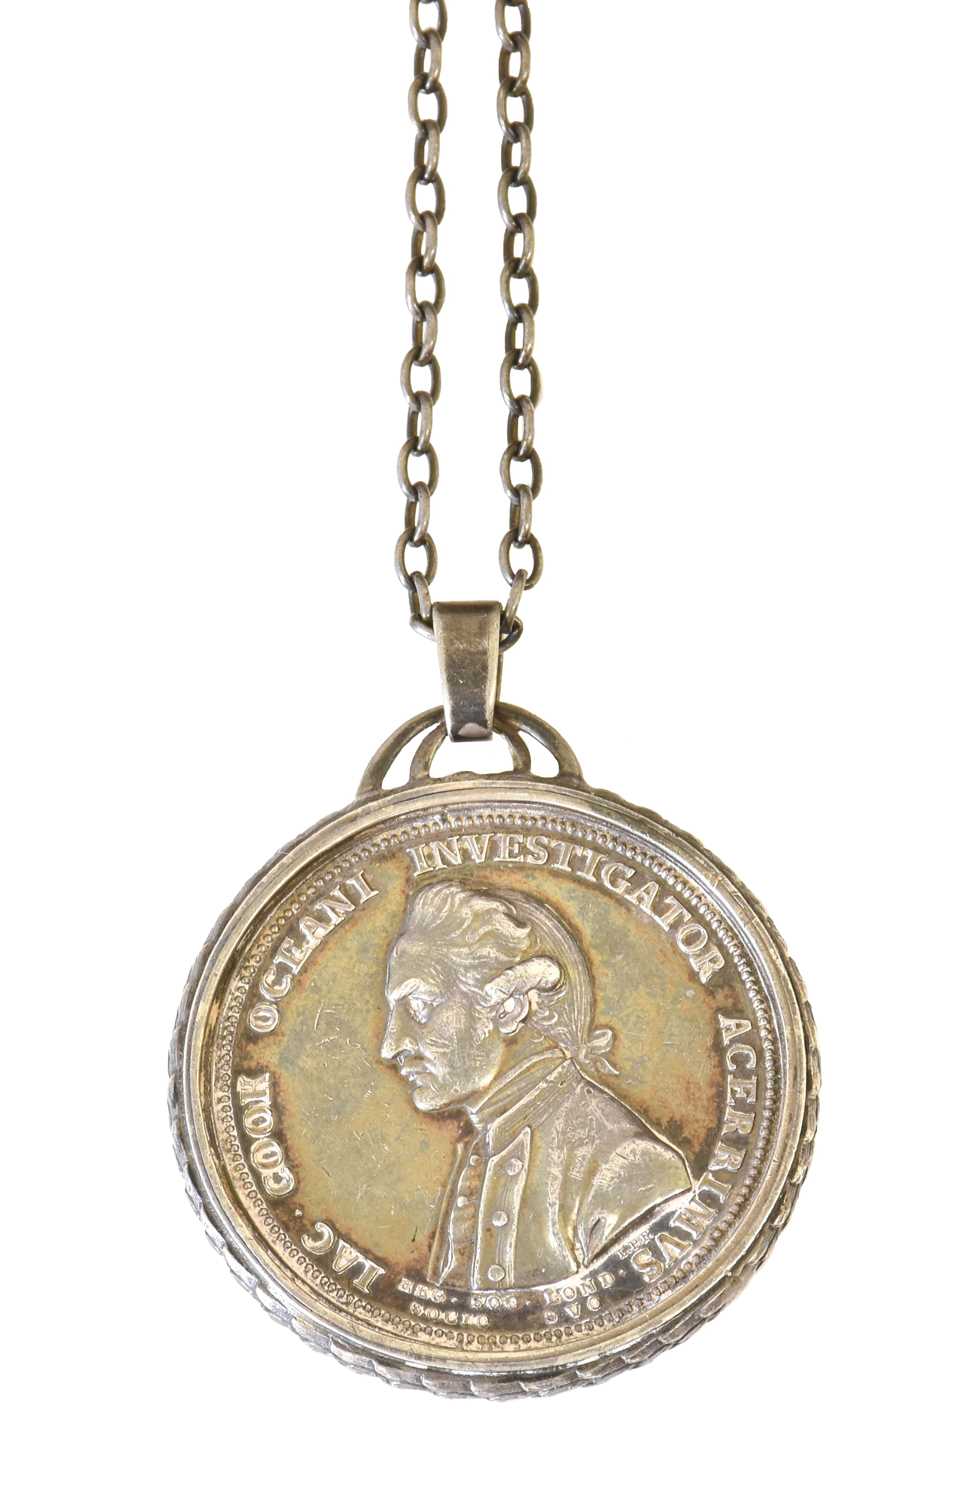 The Royal Society's Silver Medal in Commemoration of Captain Cook (1784), designed by Lewis Pingo, - Image 2 of 3